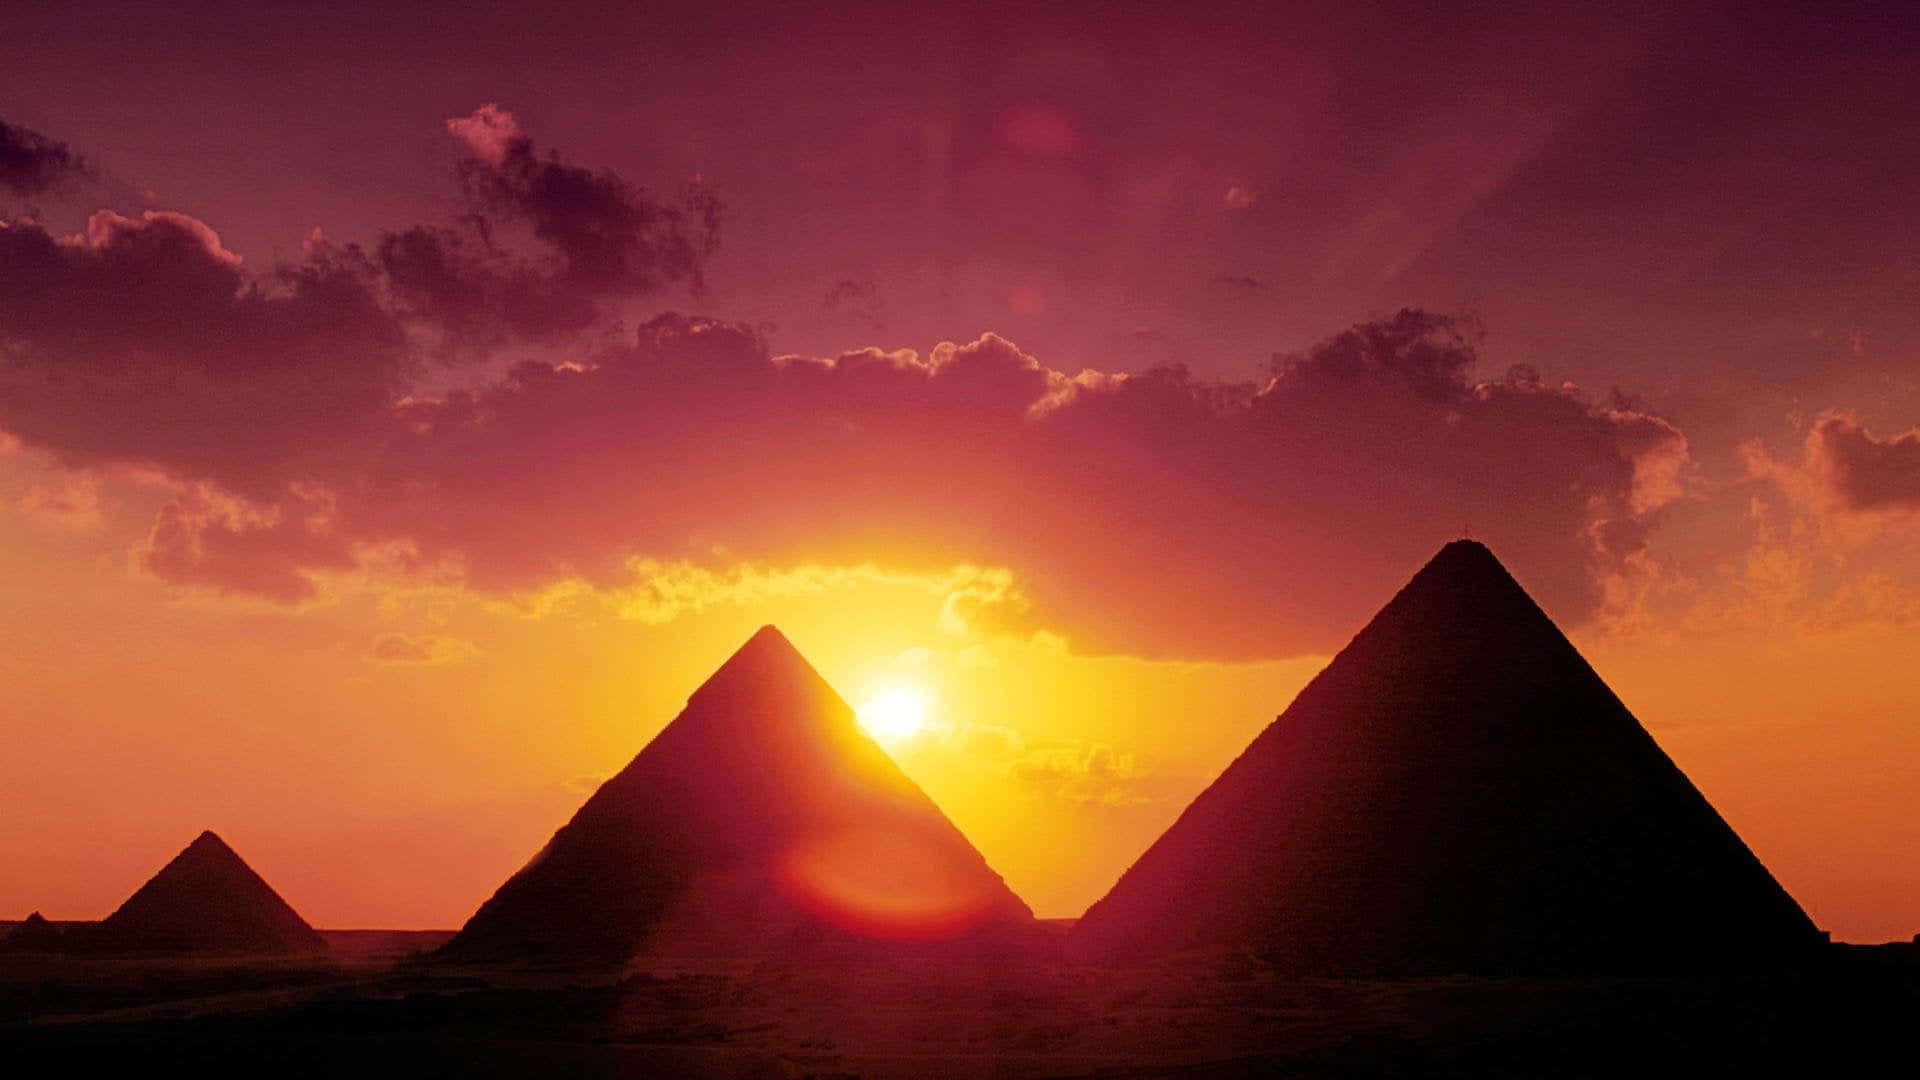 Explore Ancient Egypt with This Stunning Landscape Wallpaper